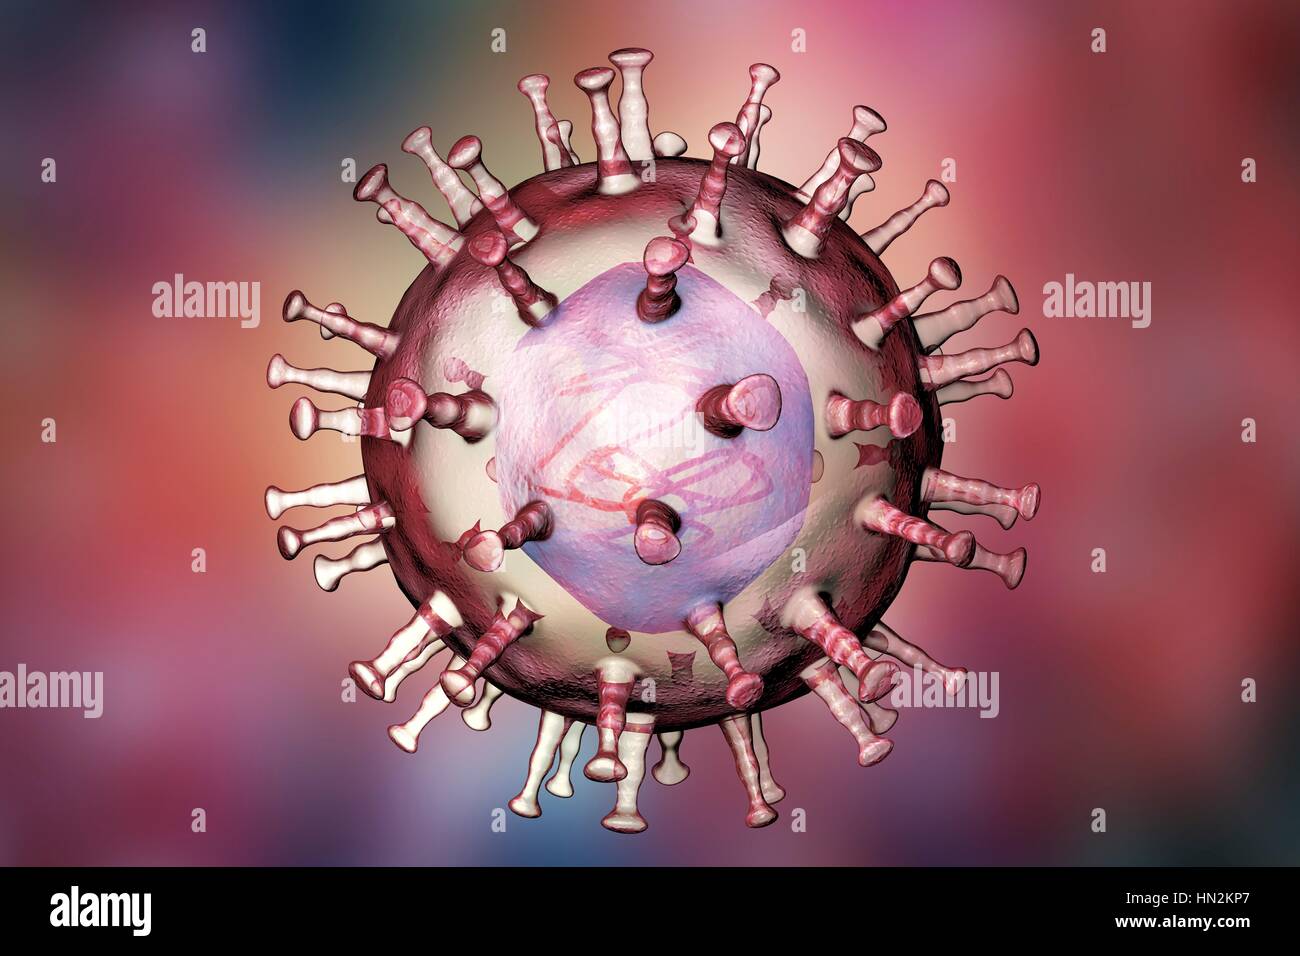 African swine fever virus, illustration. This virus is a member of the iridovirus group that causes African swine fever. Unlike other DNA- containing vertebrate viruses (except the poxviruses), the iridovirus replicates in the host cell's cytoplasm (most others replicate in the nucleus). Stock Photo